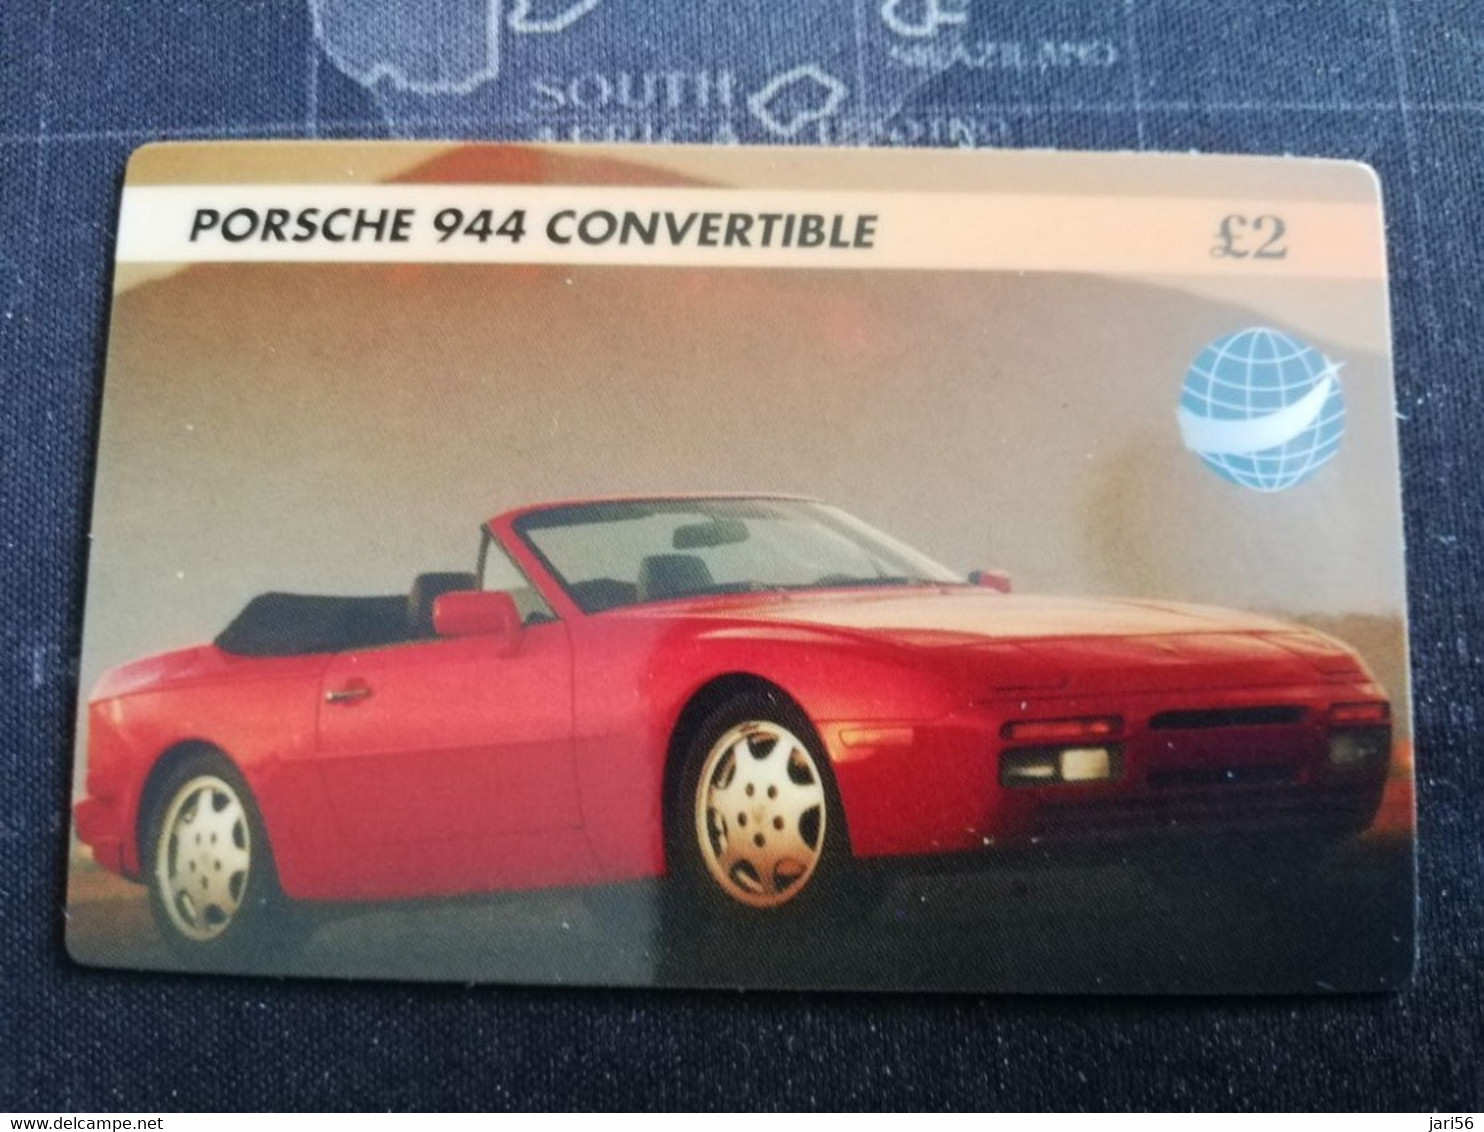 GREAT BRITAIN   2 POUND  PORSCHE 944 CONVERTIBLE    AUTOMOBILES/RACING CARS /SPORT CARS  PREPAID      **3260** - [10] Collections